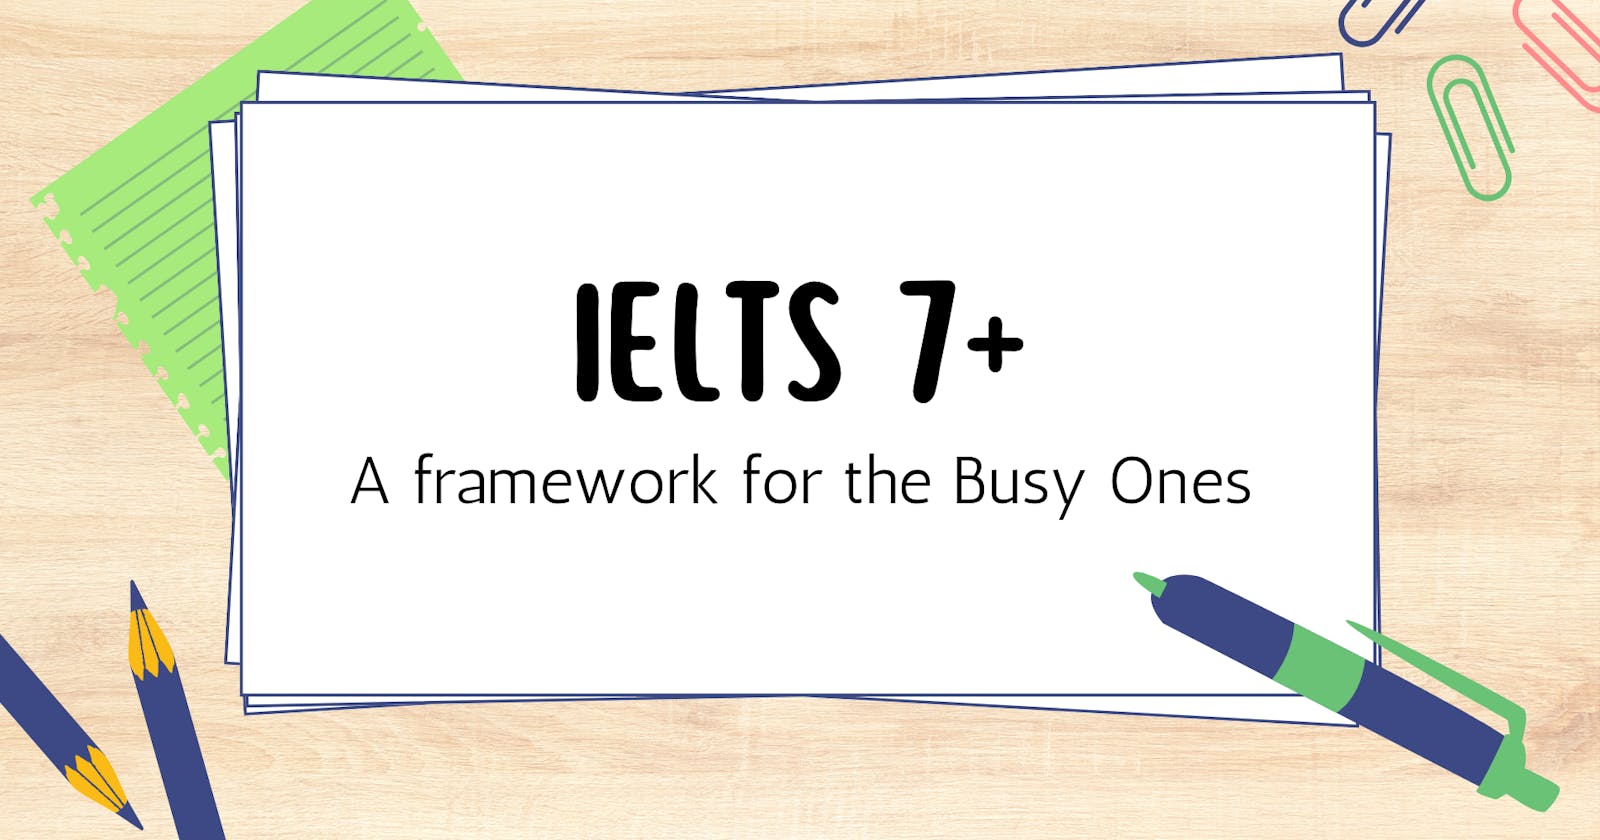 Efficient Strategies: A Framework for Achieving IELTS Band 7+ for Busy Individuals